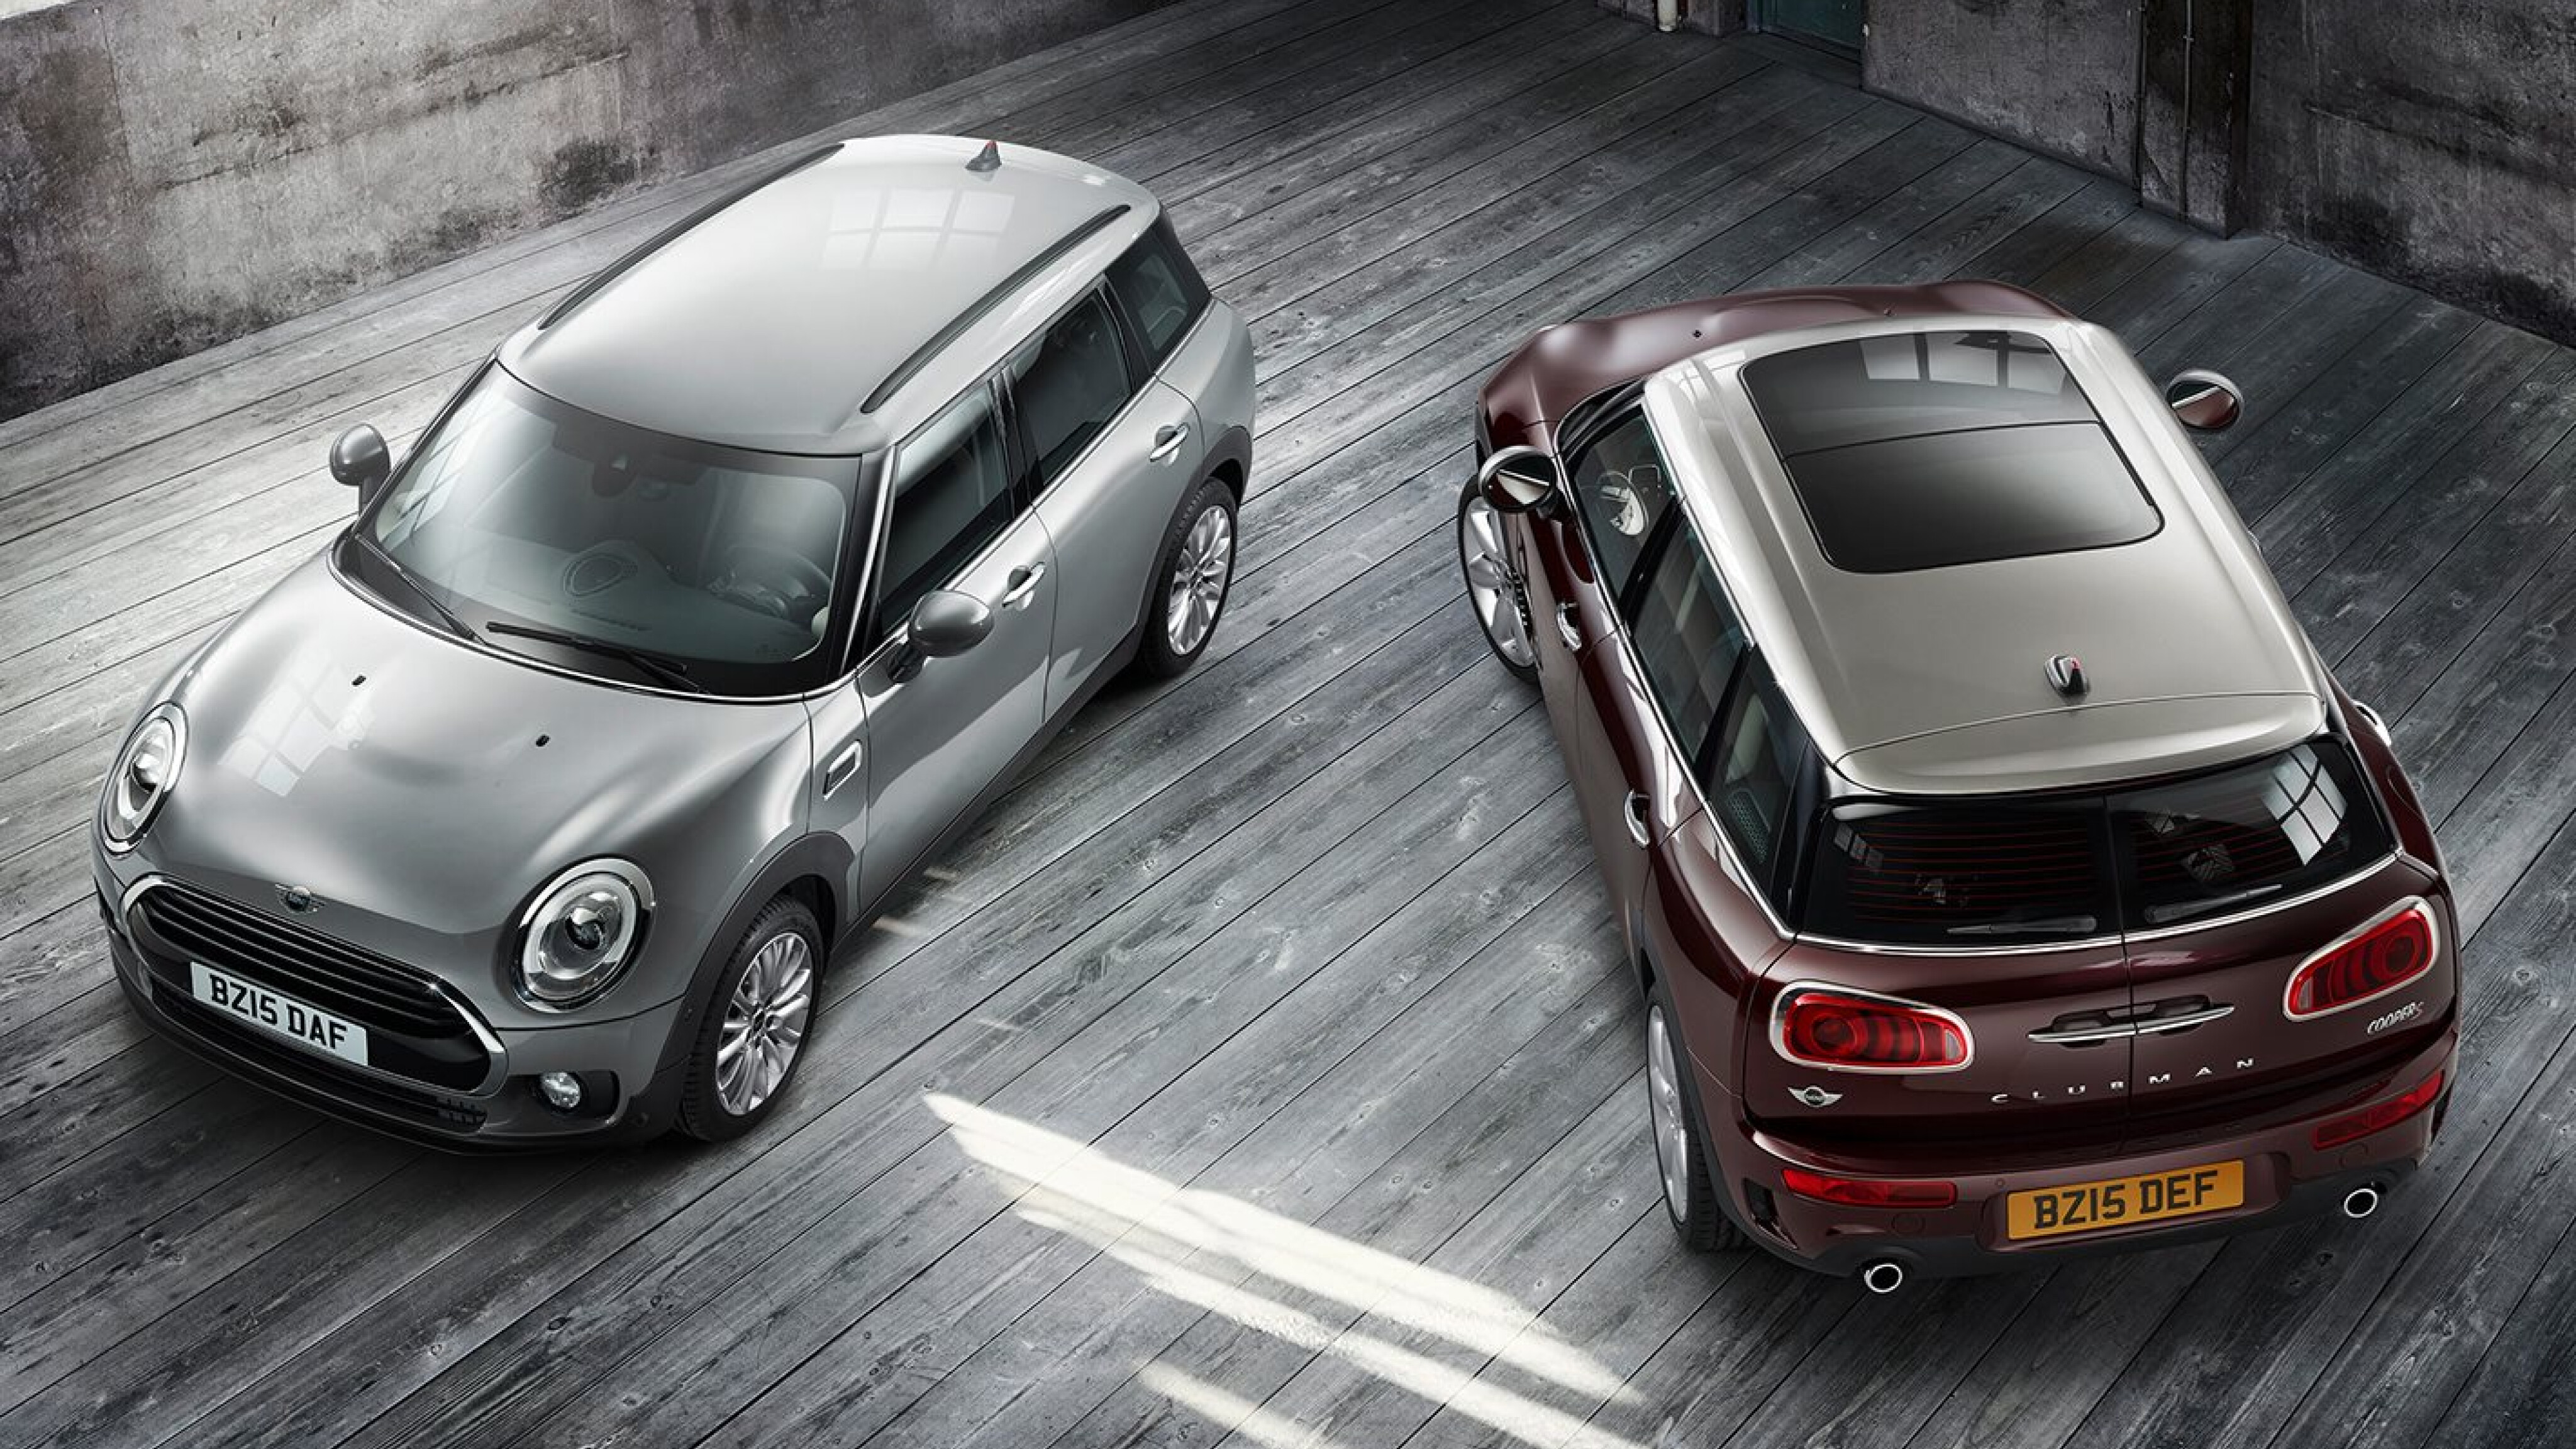 Mini Cooper Clubman: 7 things you need to know